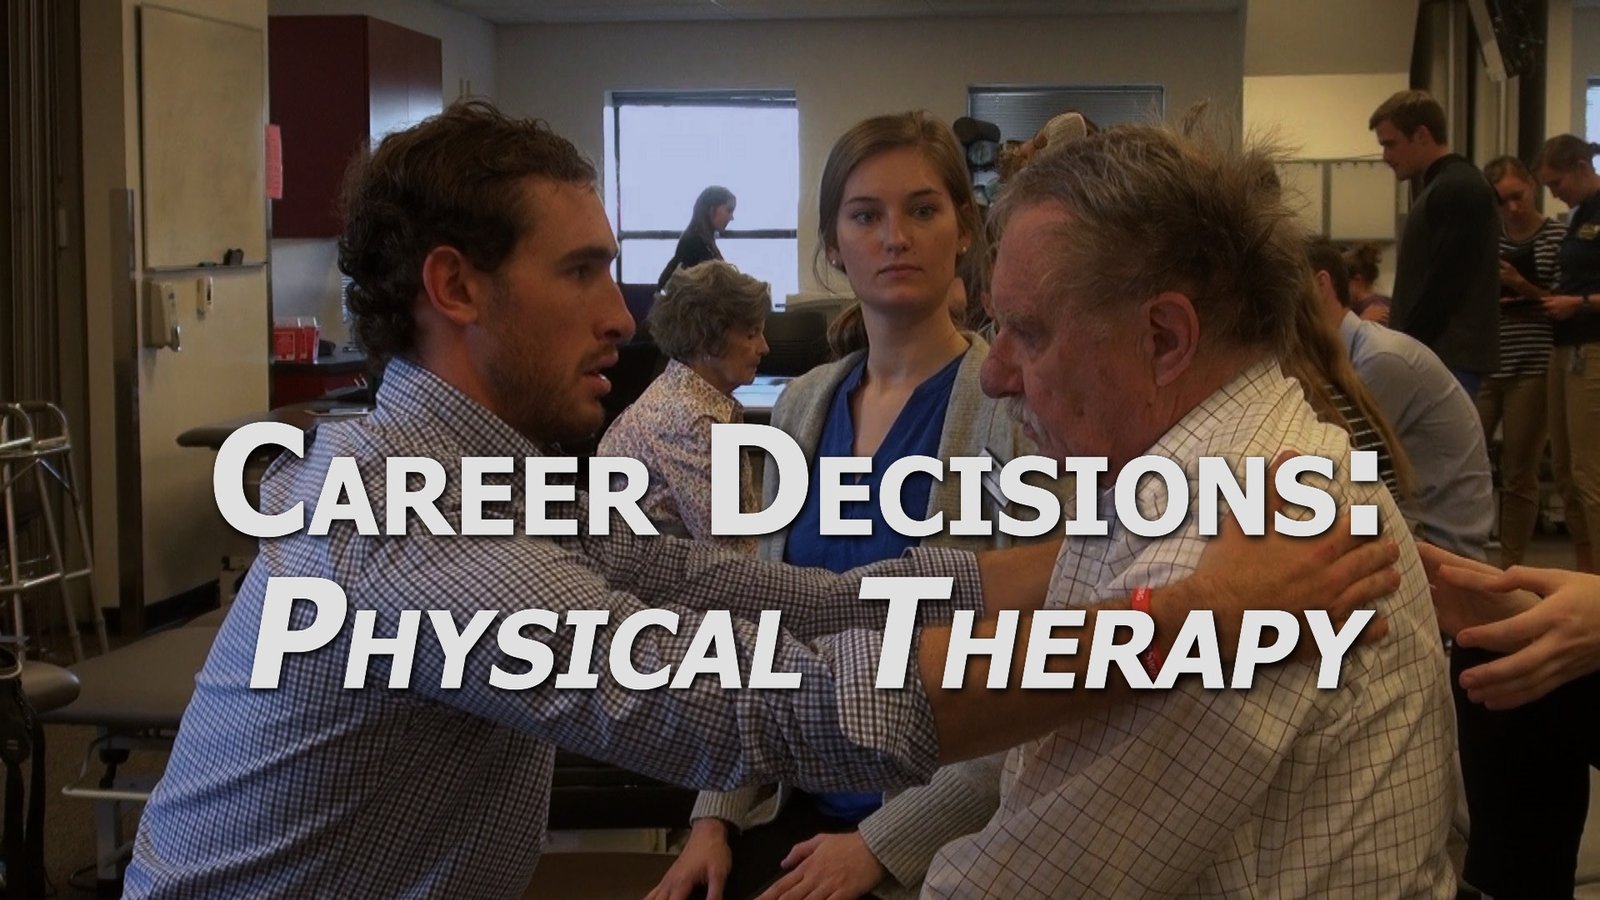 Career Decisions: Physical Therapy - An Overview of a Career Choice in Physical Therapy